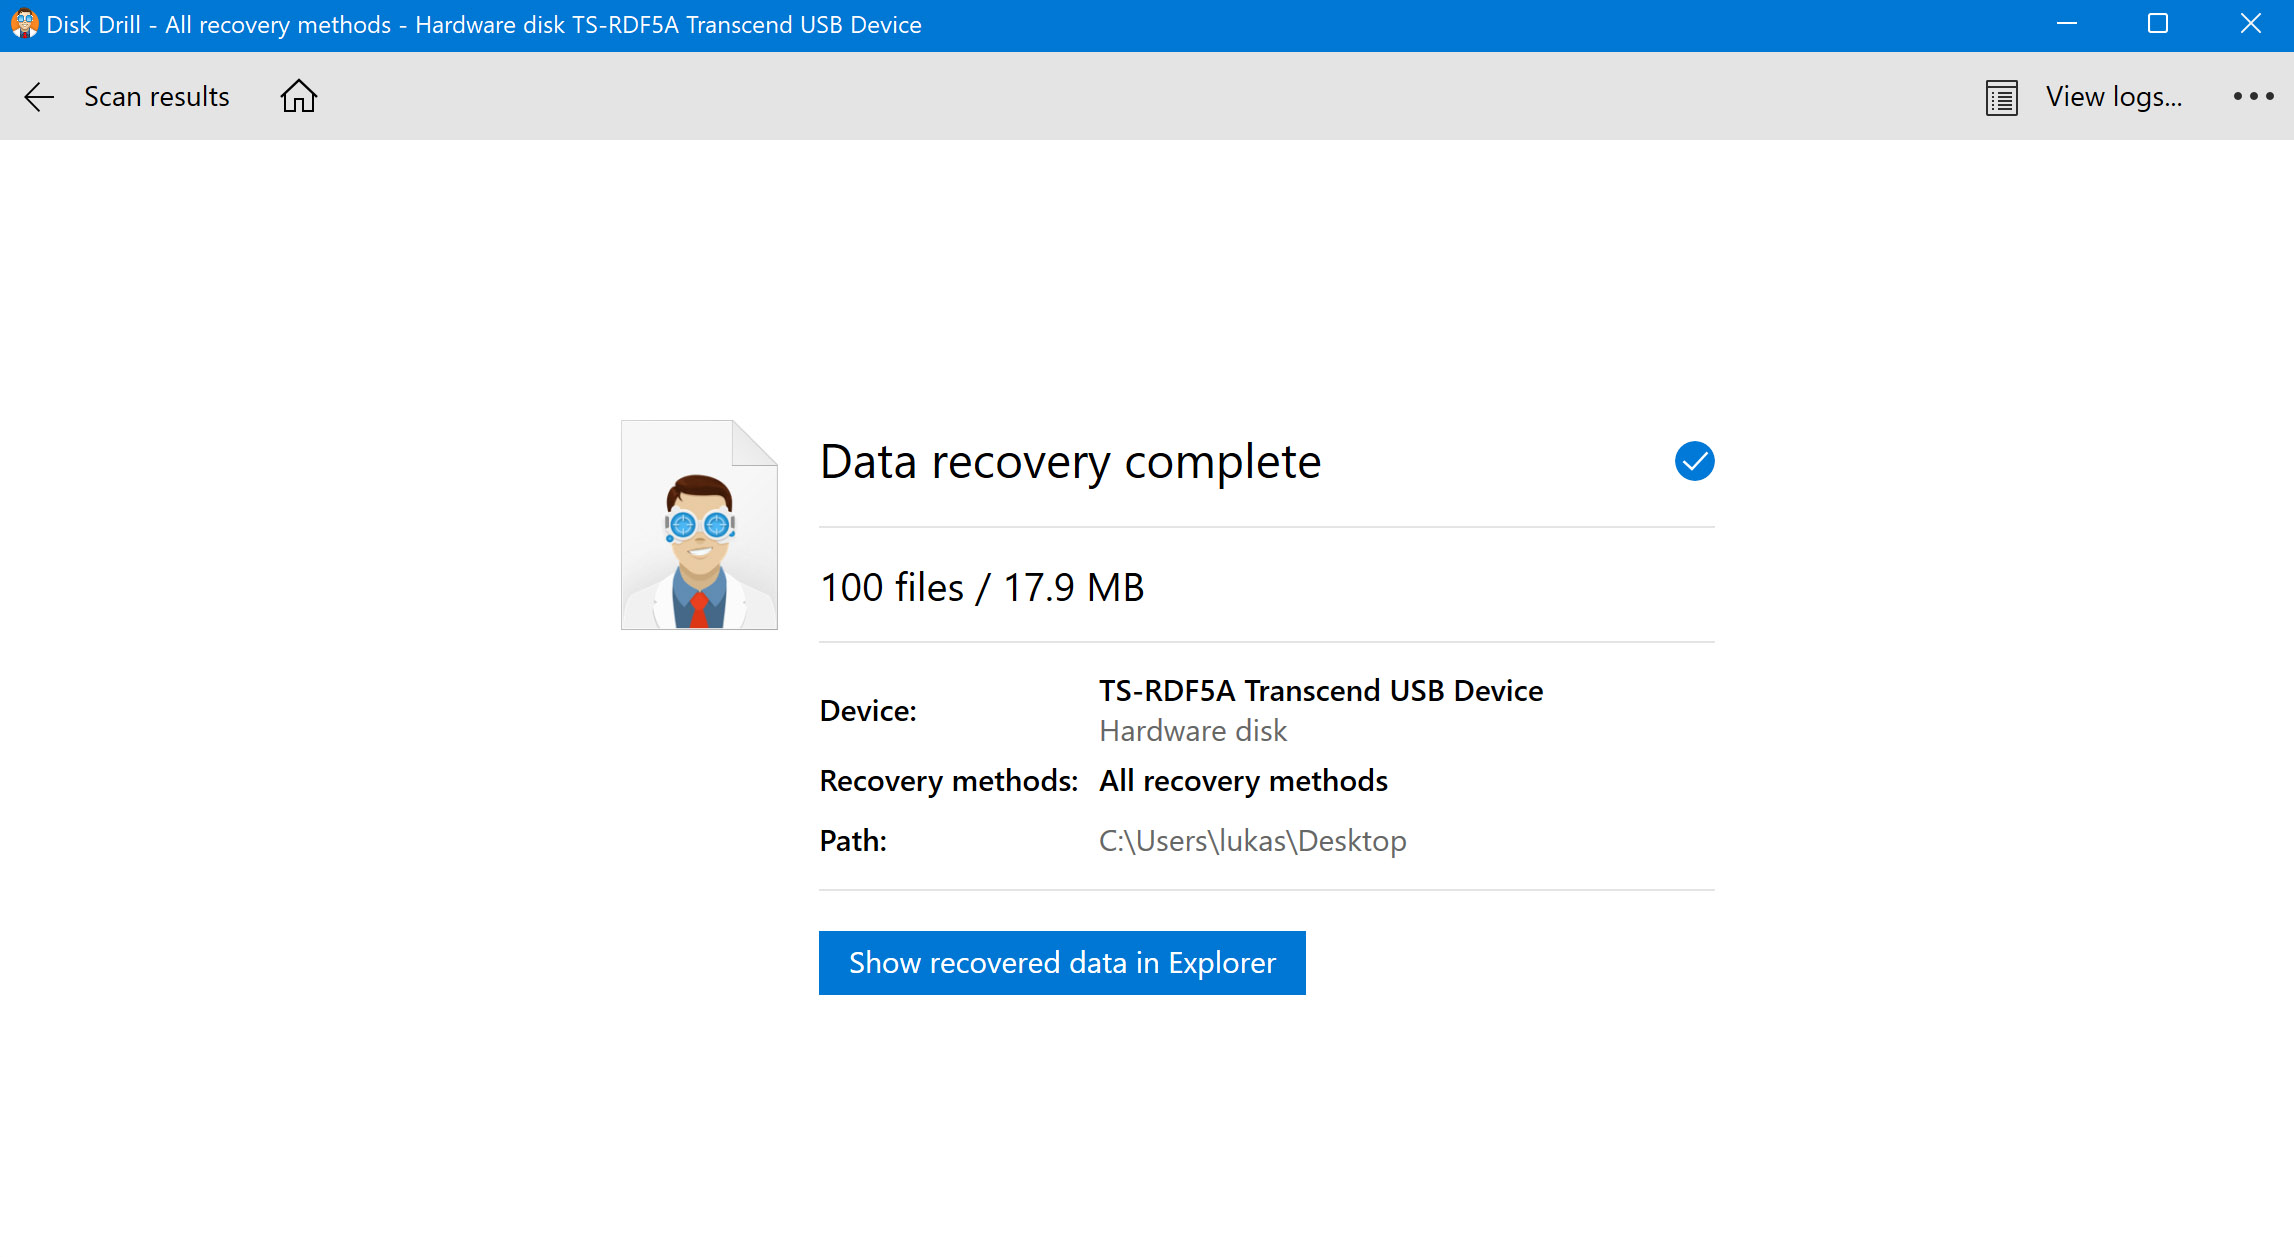 Recover the deleted data